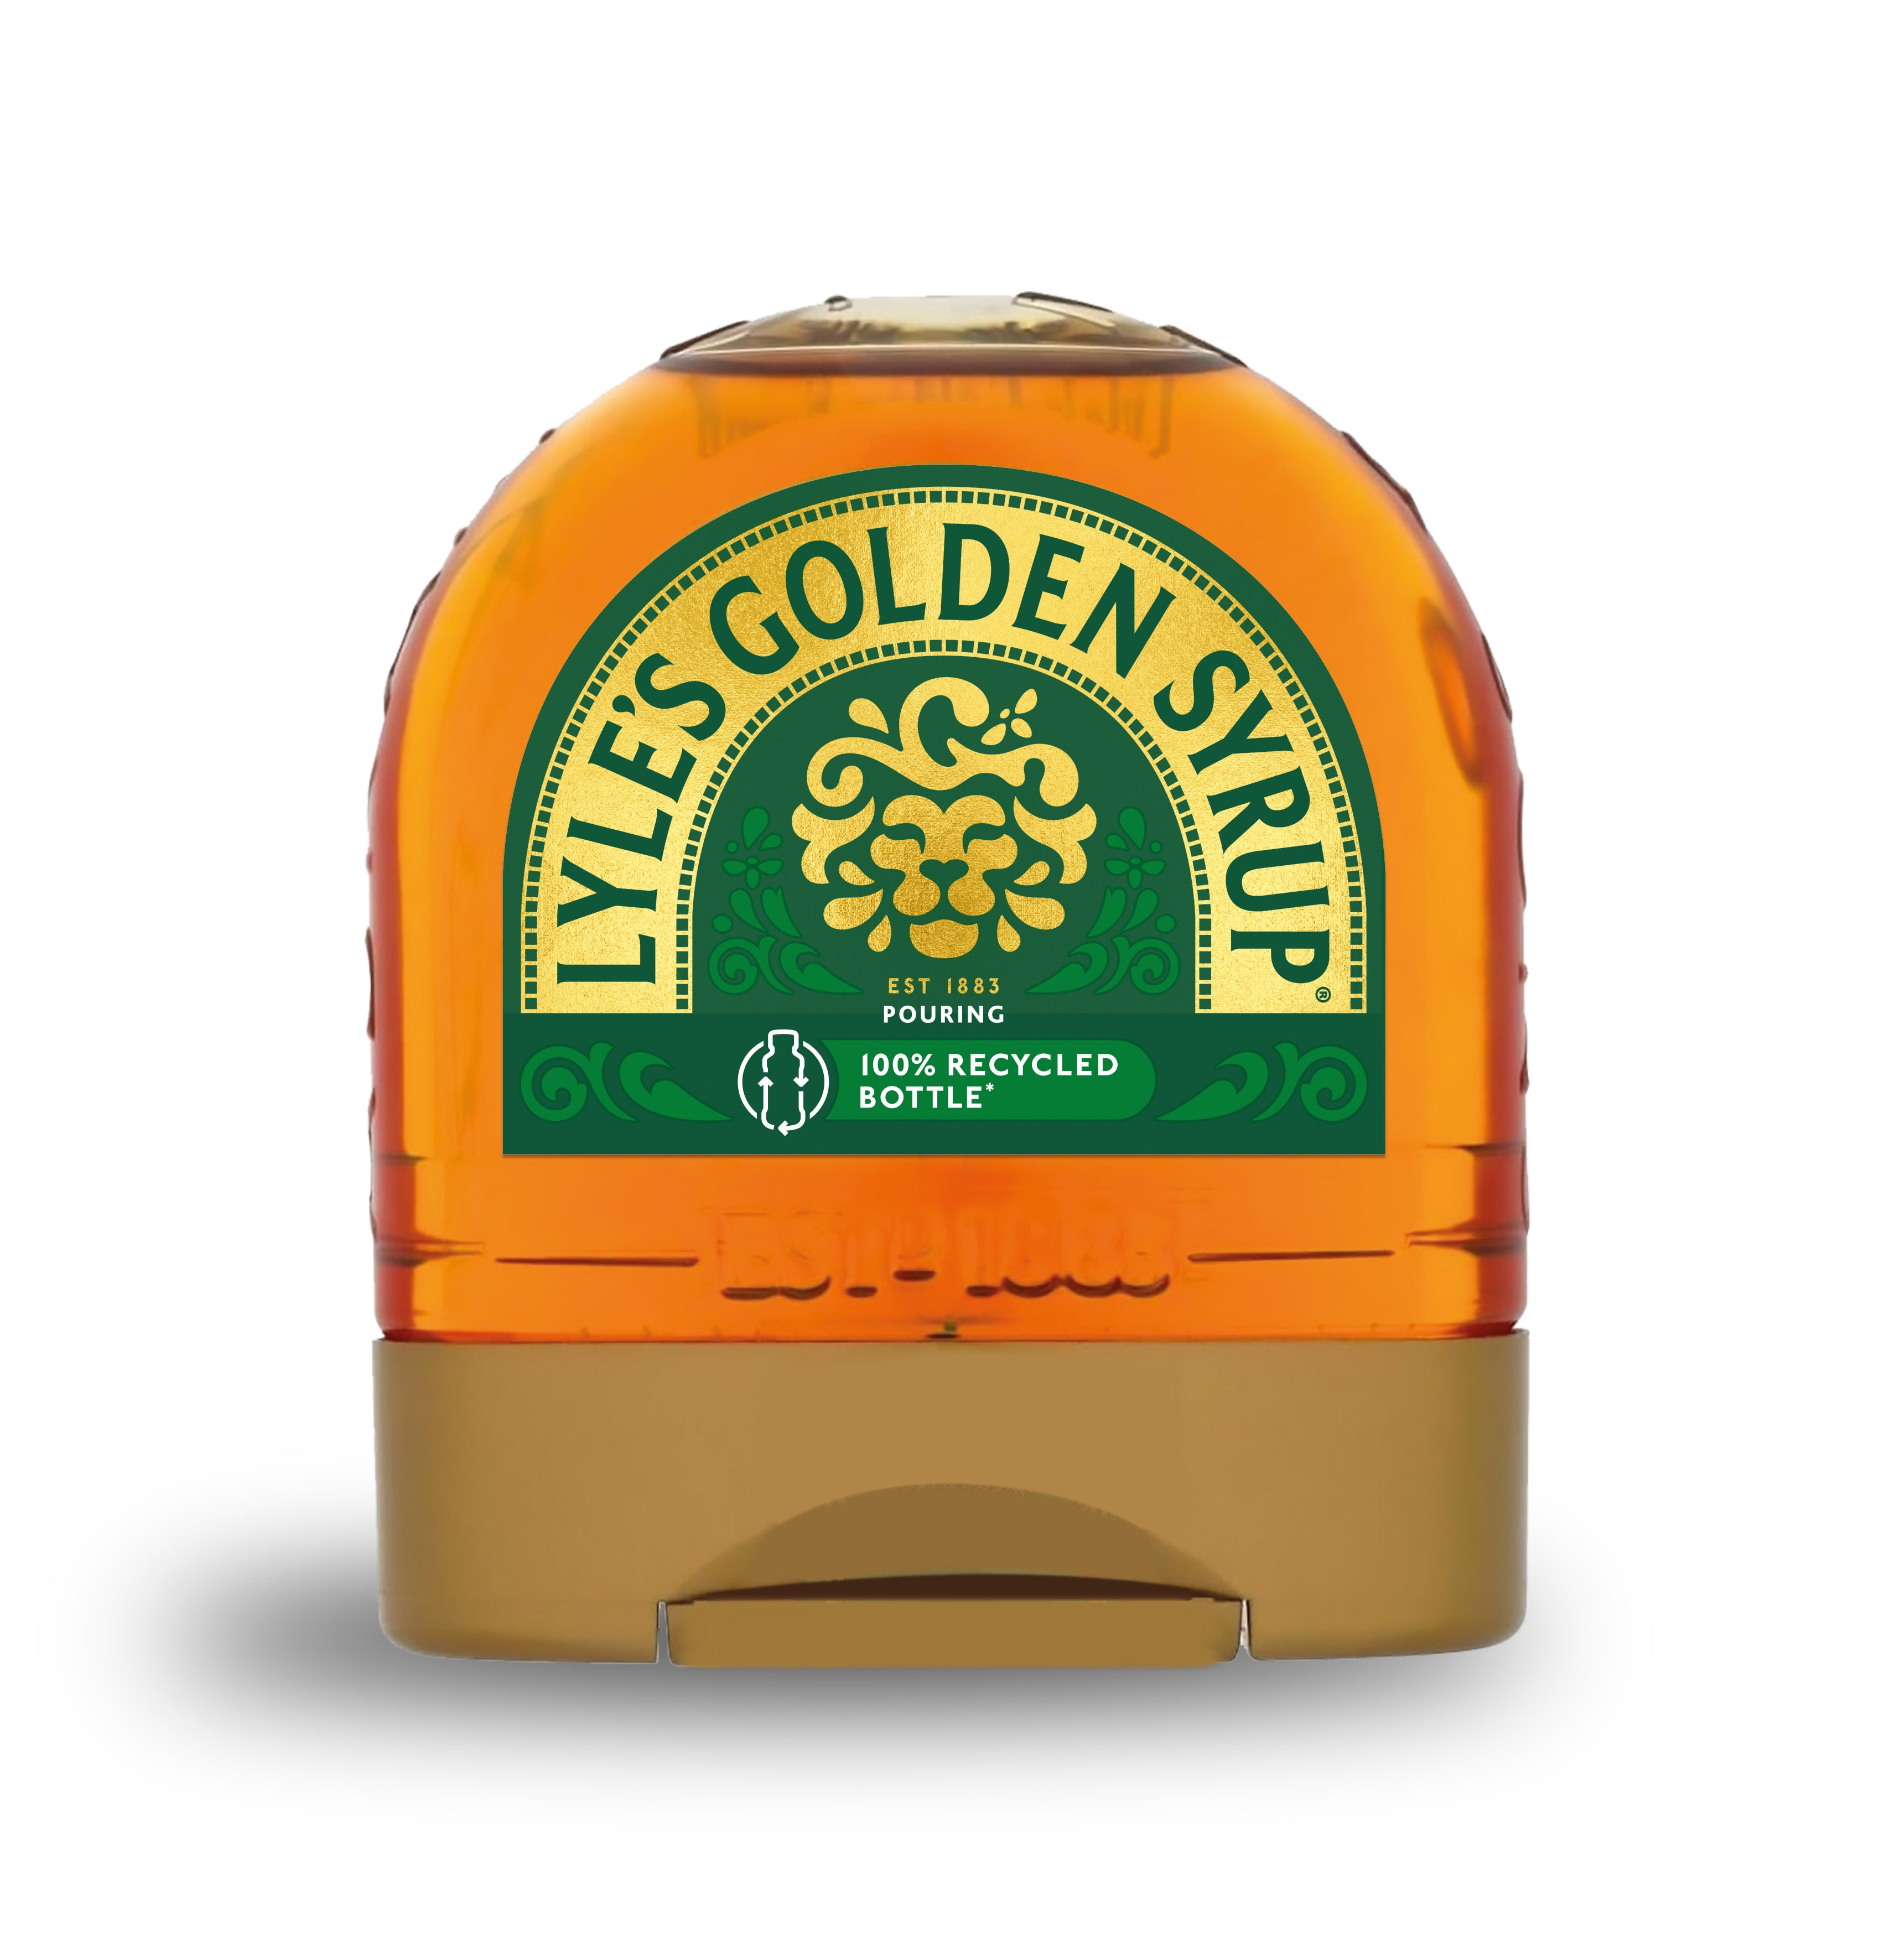 Lyle's Golden Syrup of it's new design logo